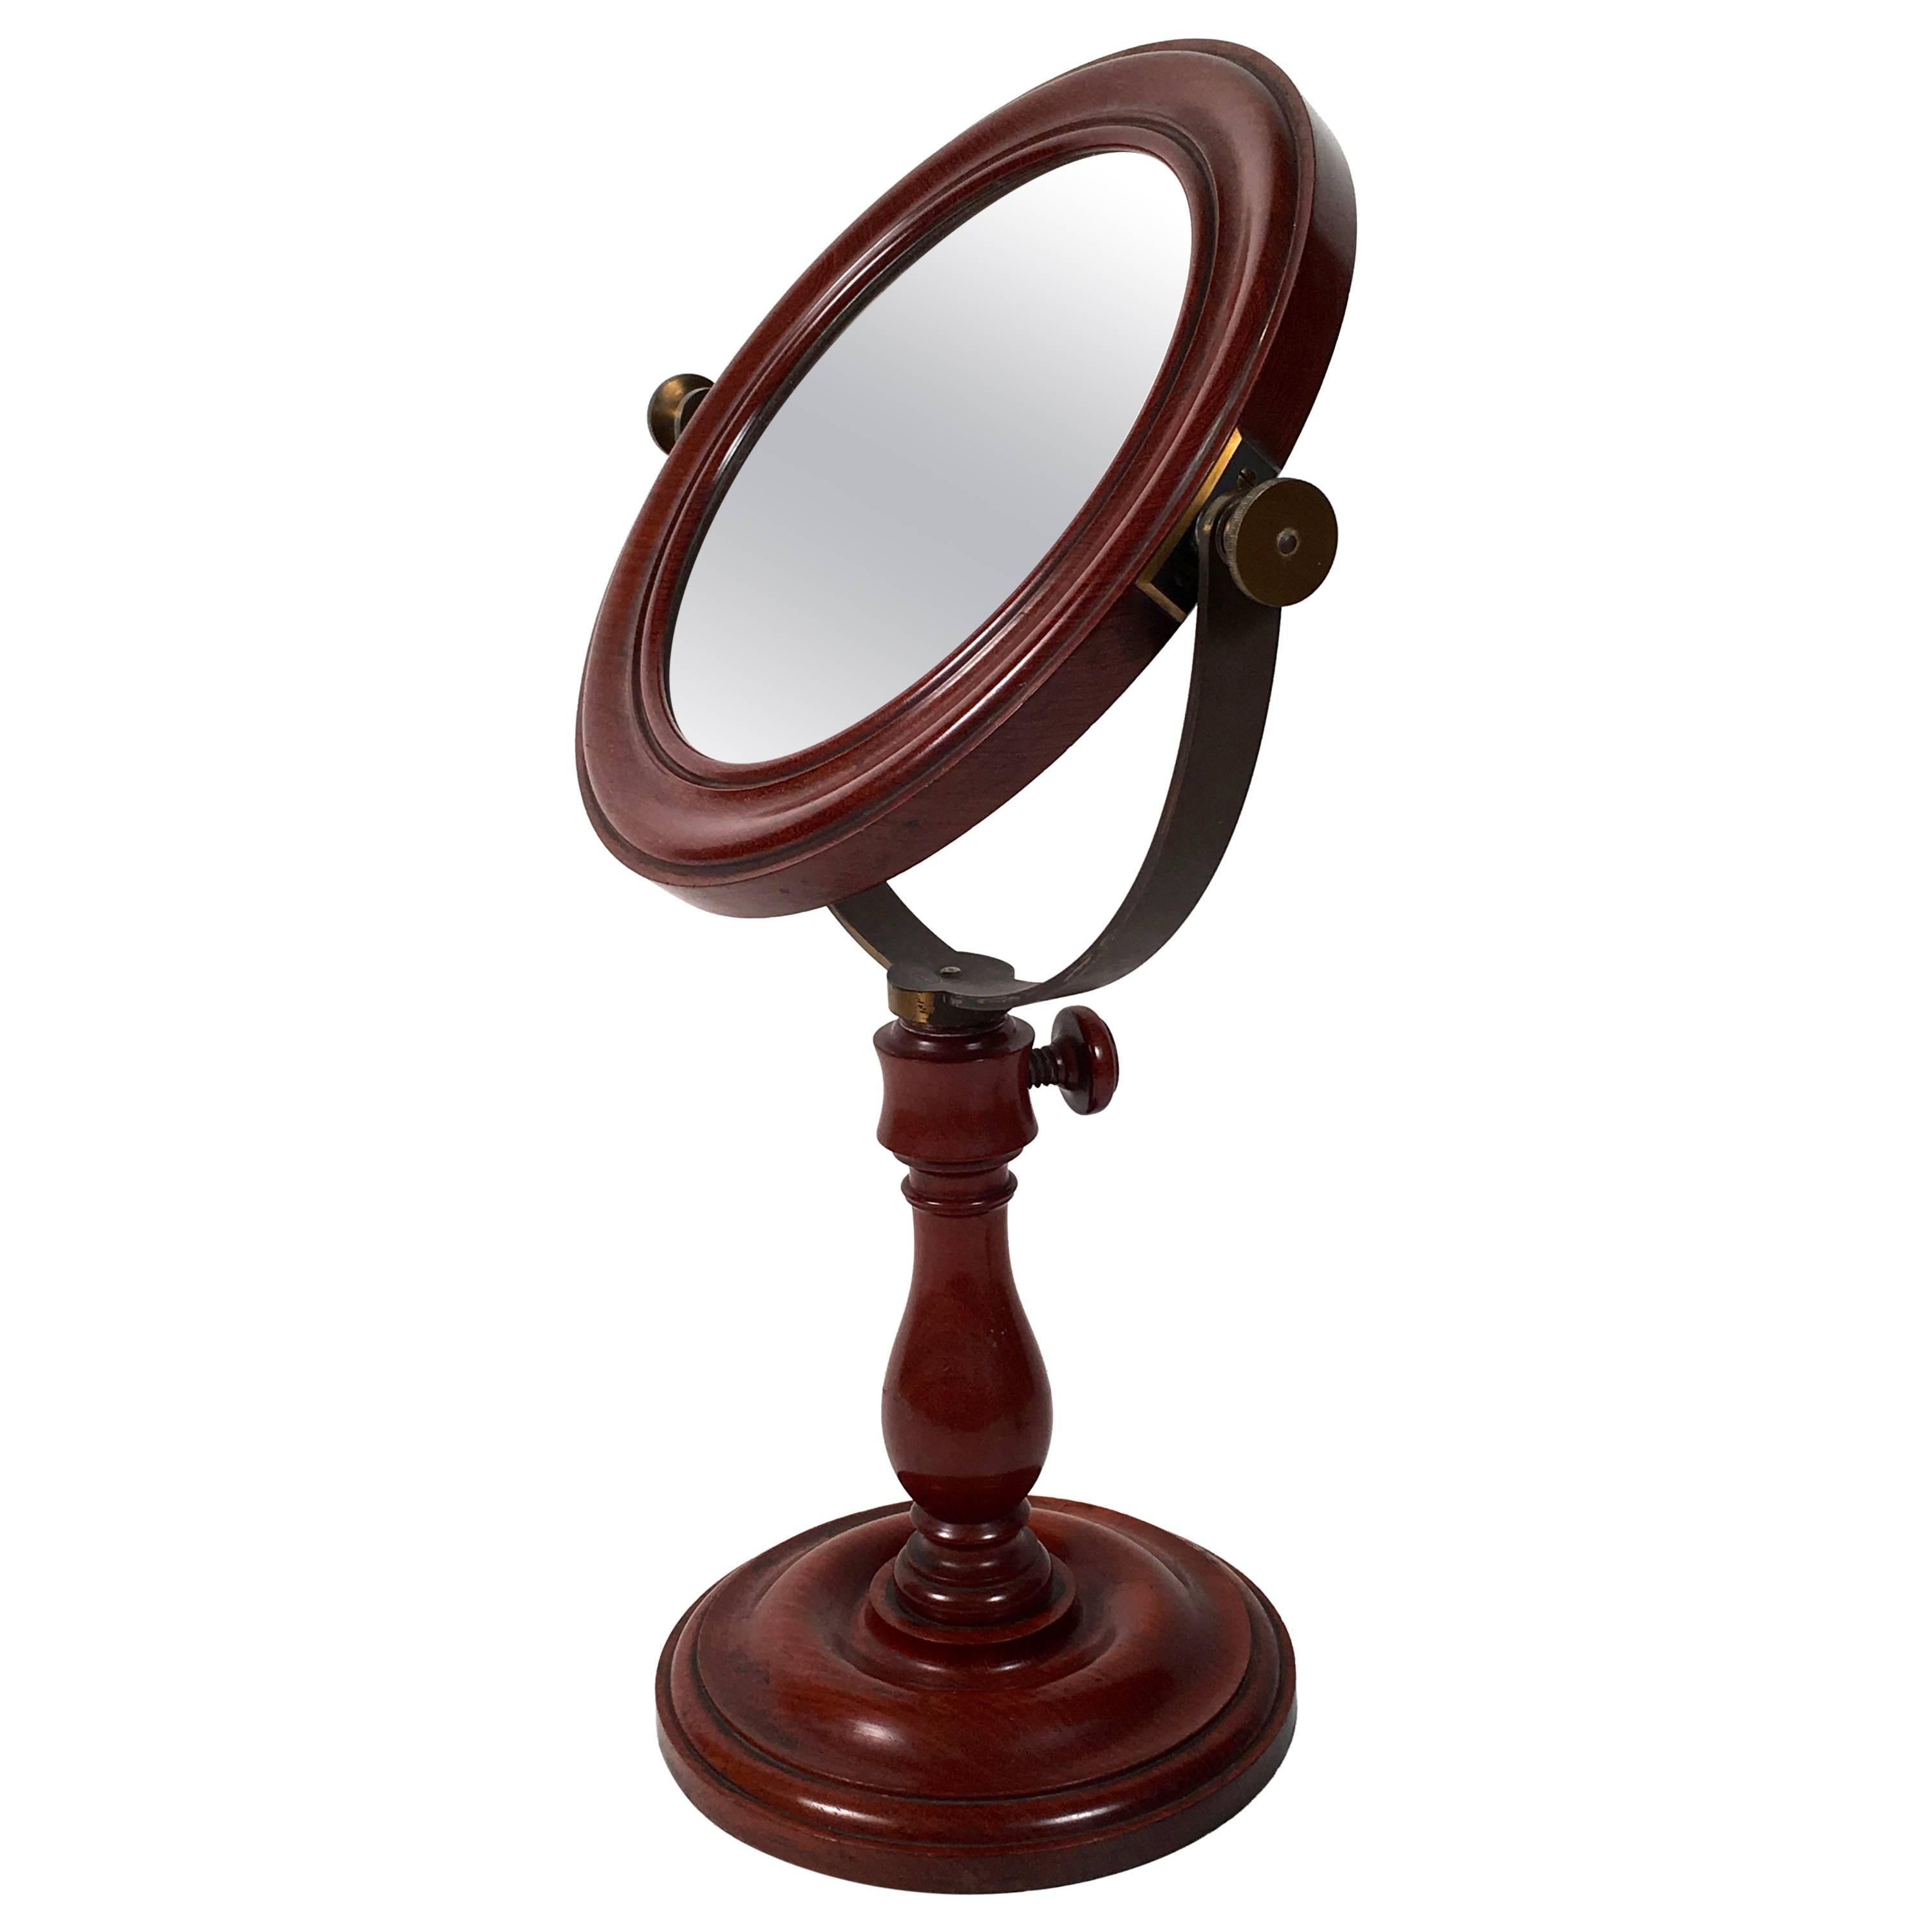 A large and beautifully made French laboratory scientific mirror in mahogany and brass, signed by maker J. Dubosco, Paris, the large circular molded bezel enclosing a high quality optical mirror, with strong magnifying power, supported on an